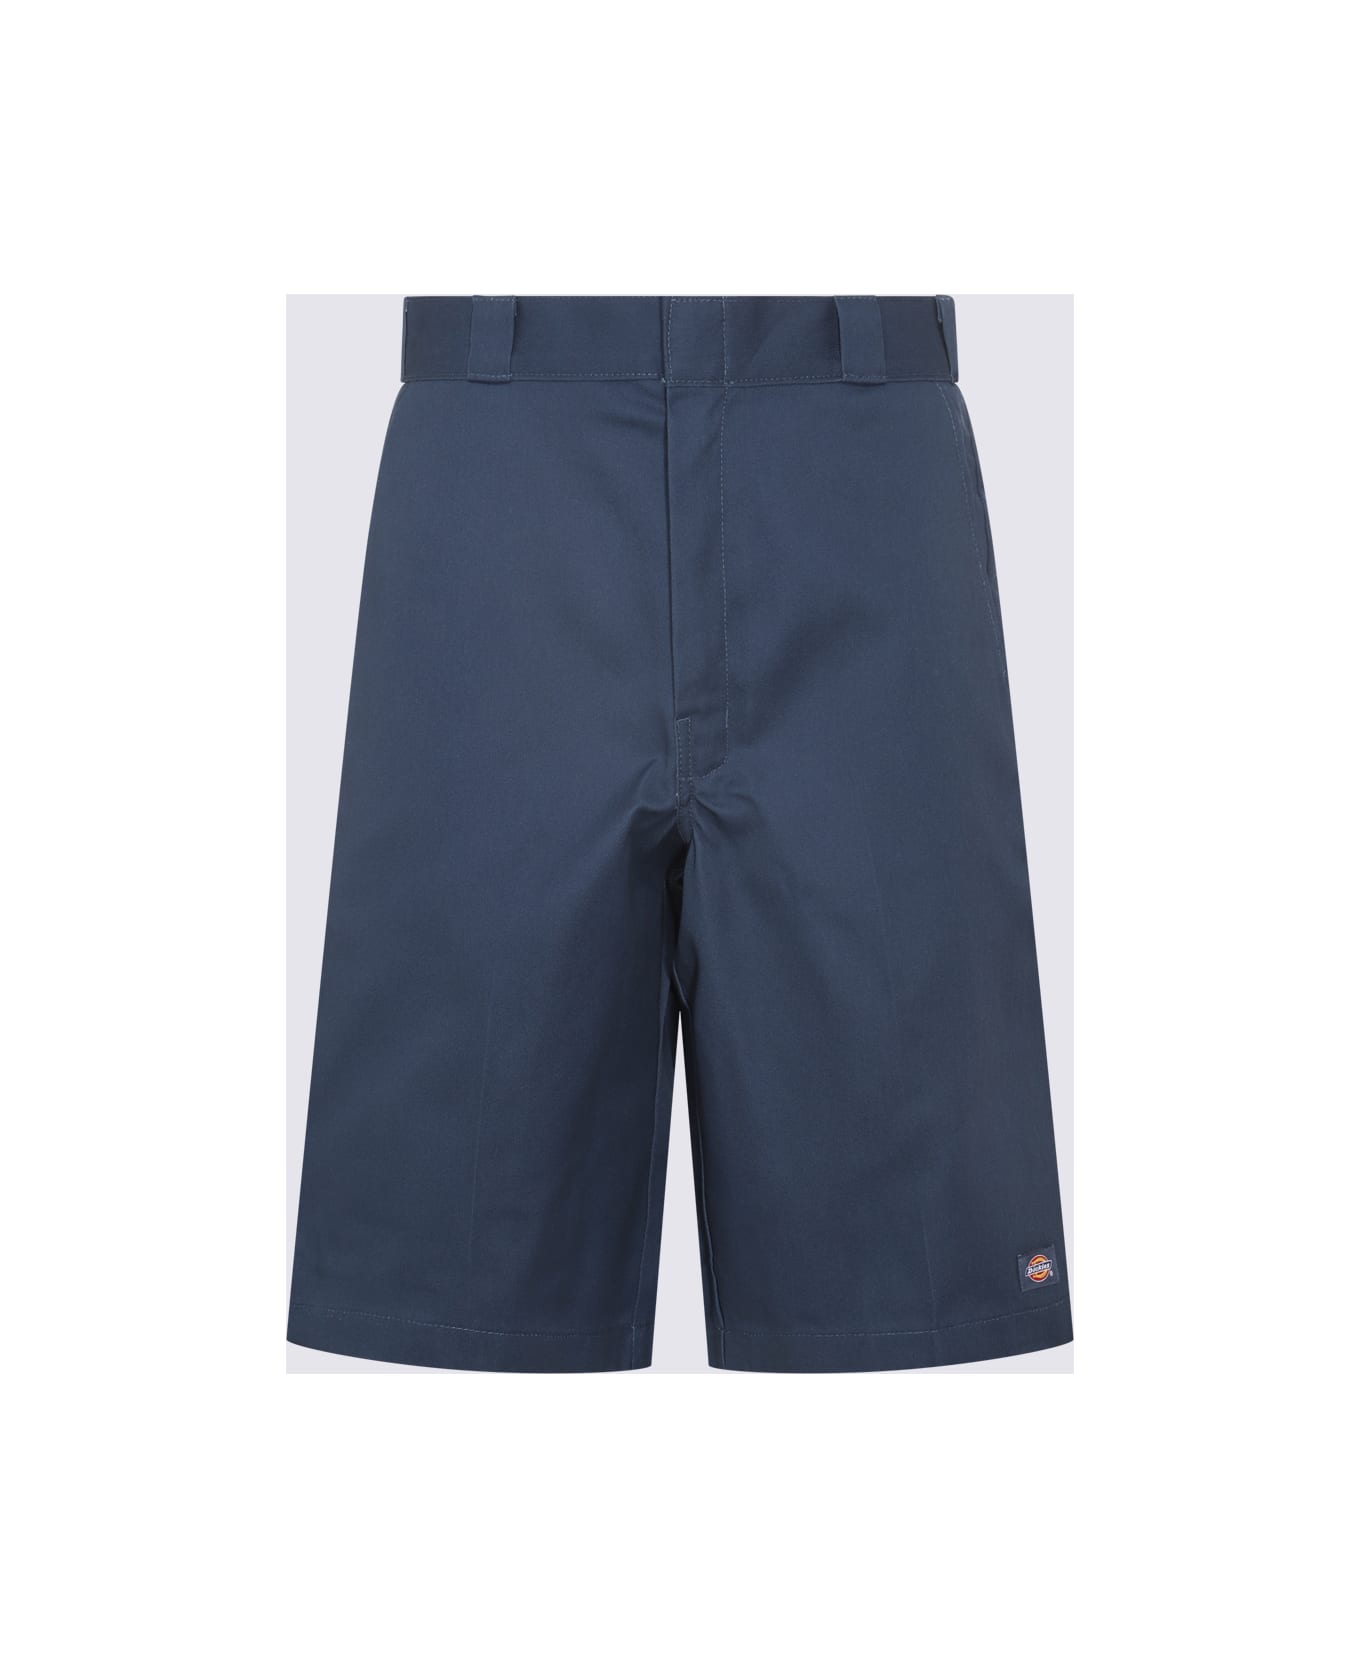 Dickies Air Force Blue Cotton Blend Shorts